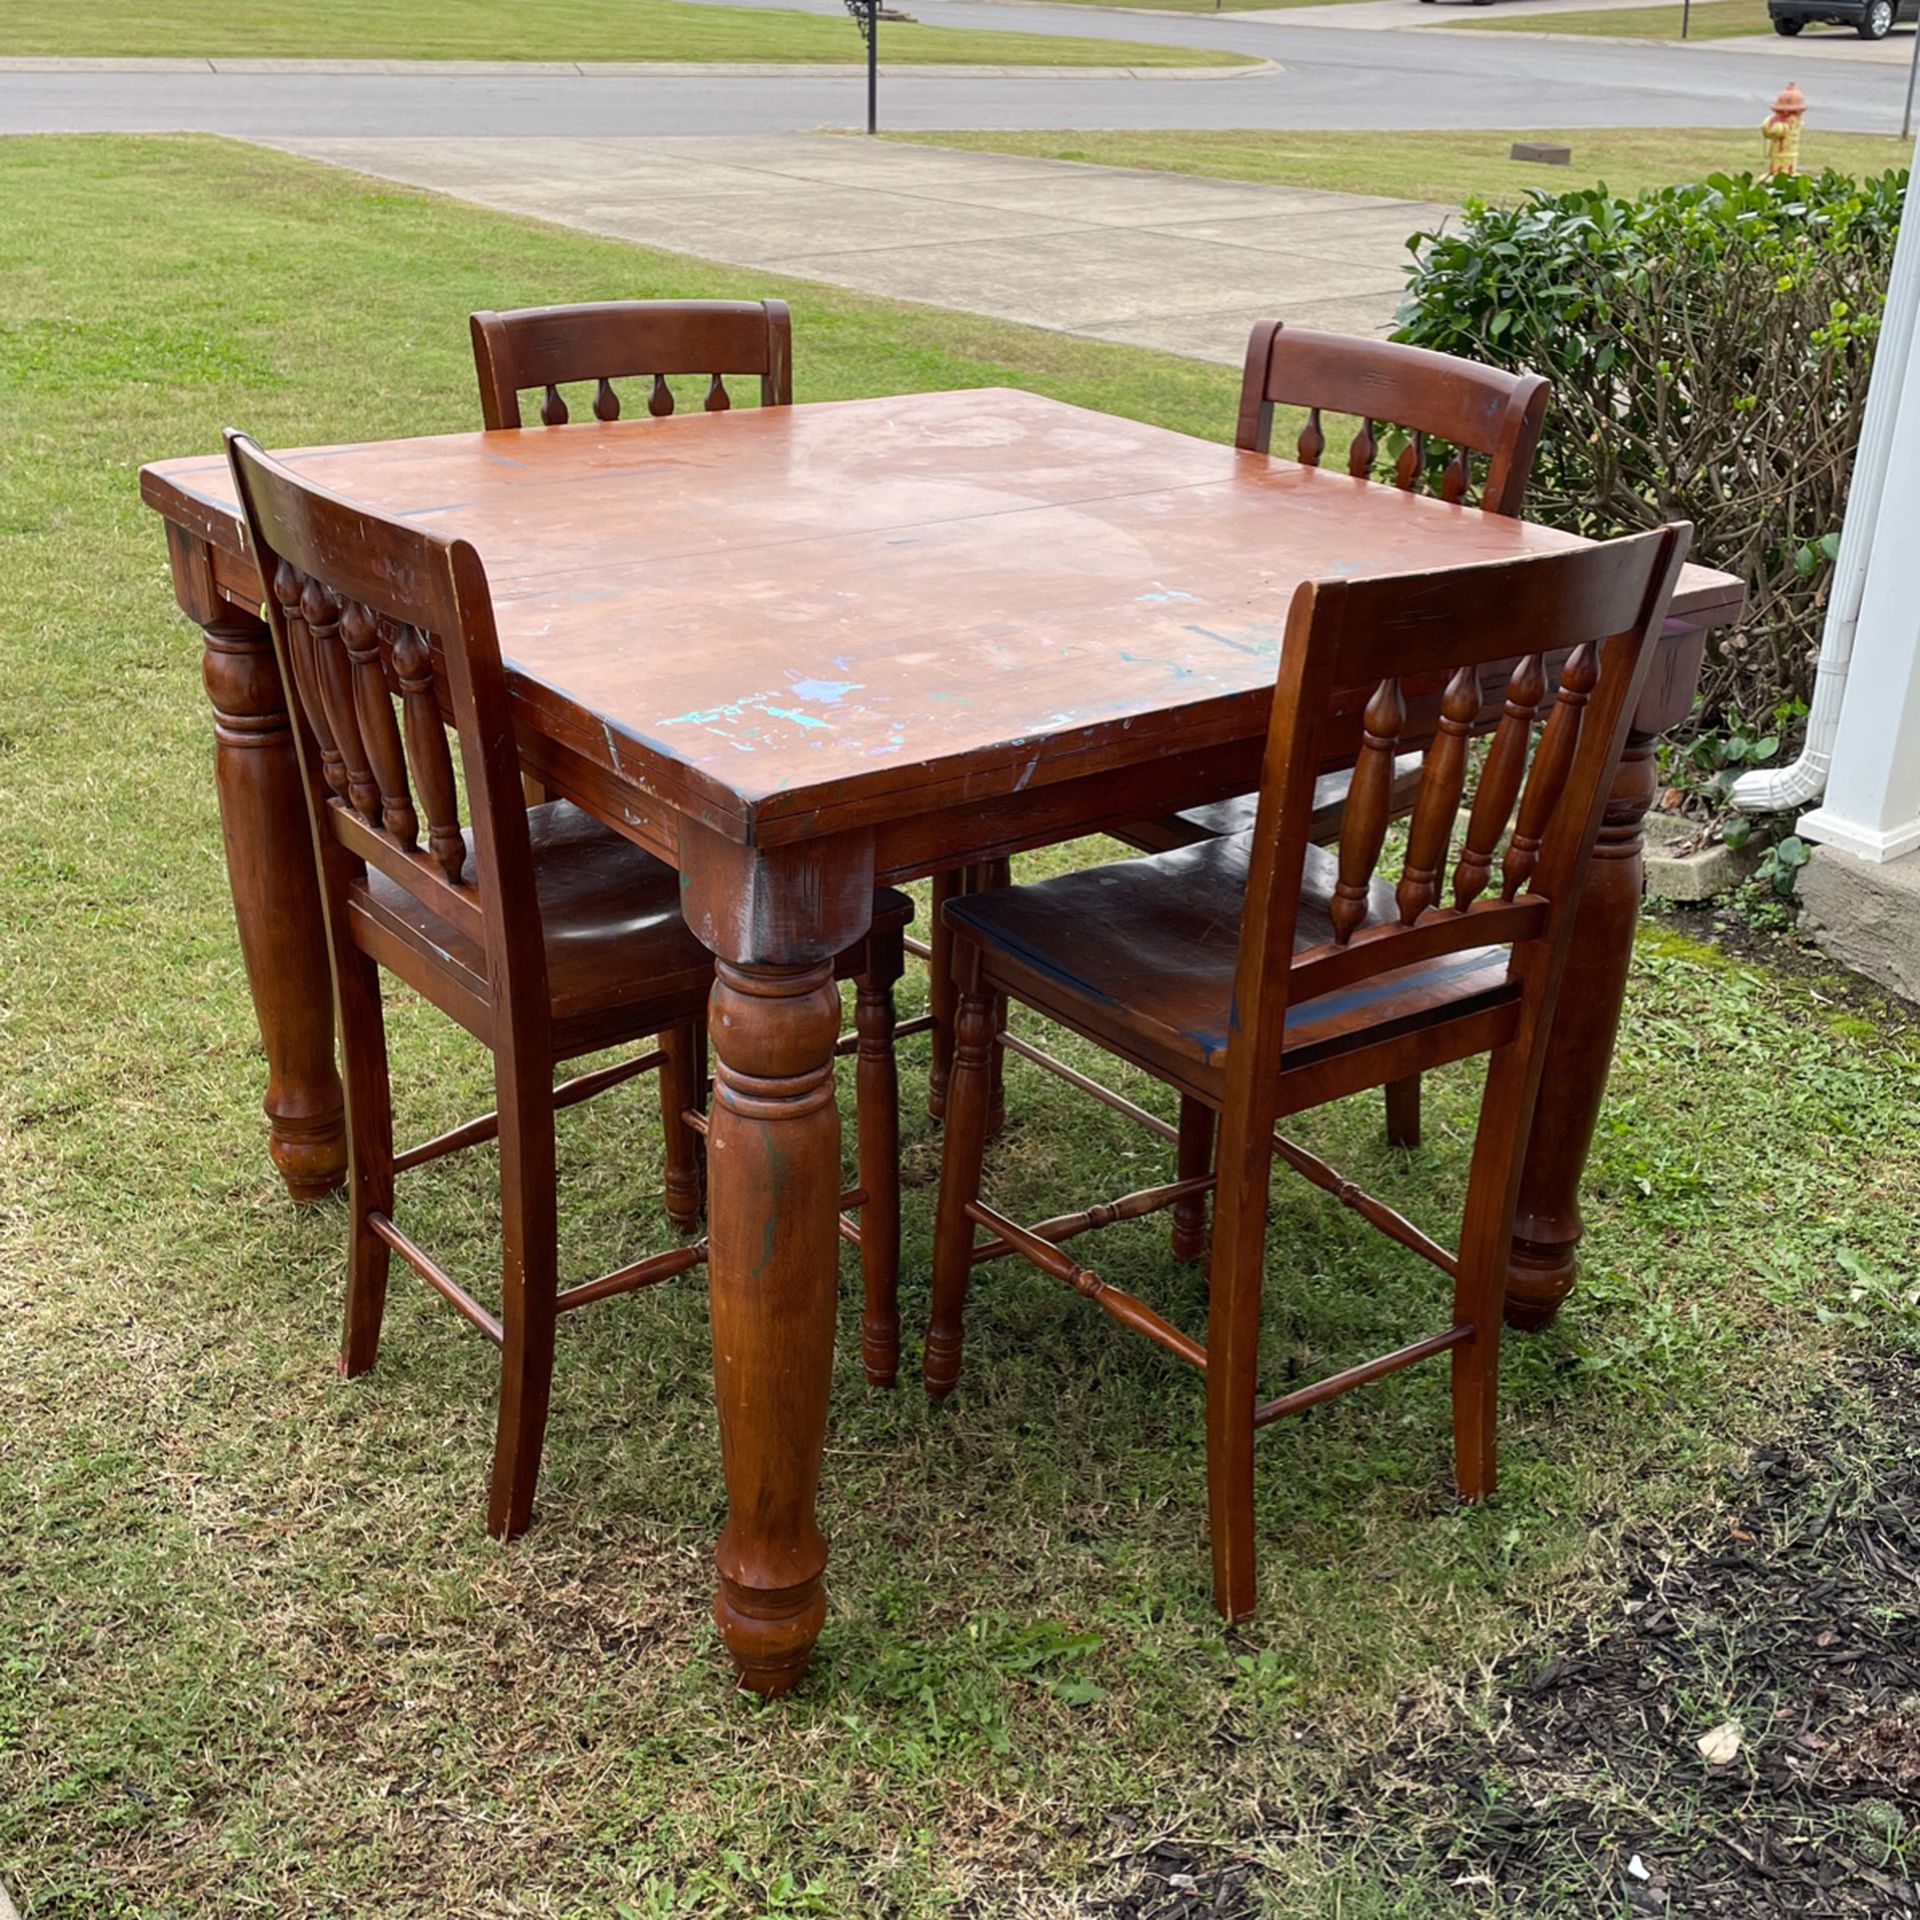 Super Sturdy Kitchen Table 6 Chairs 